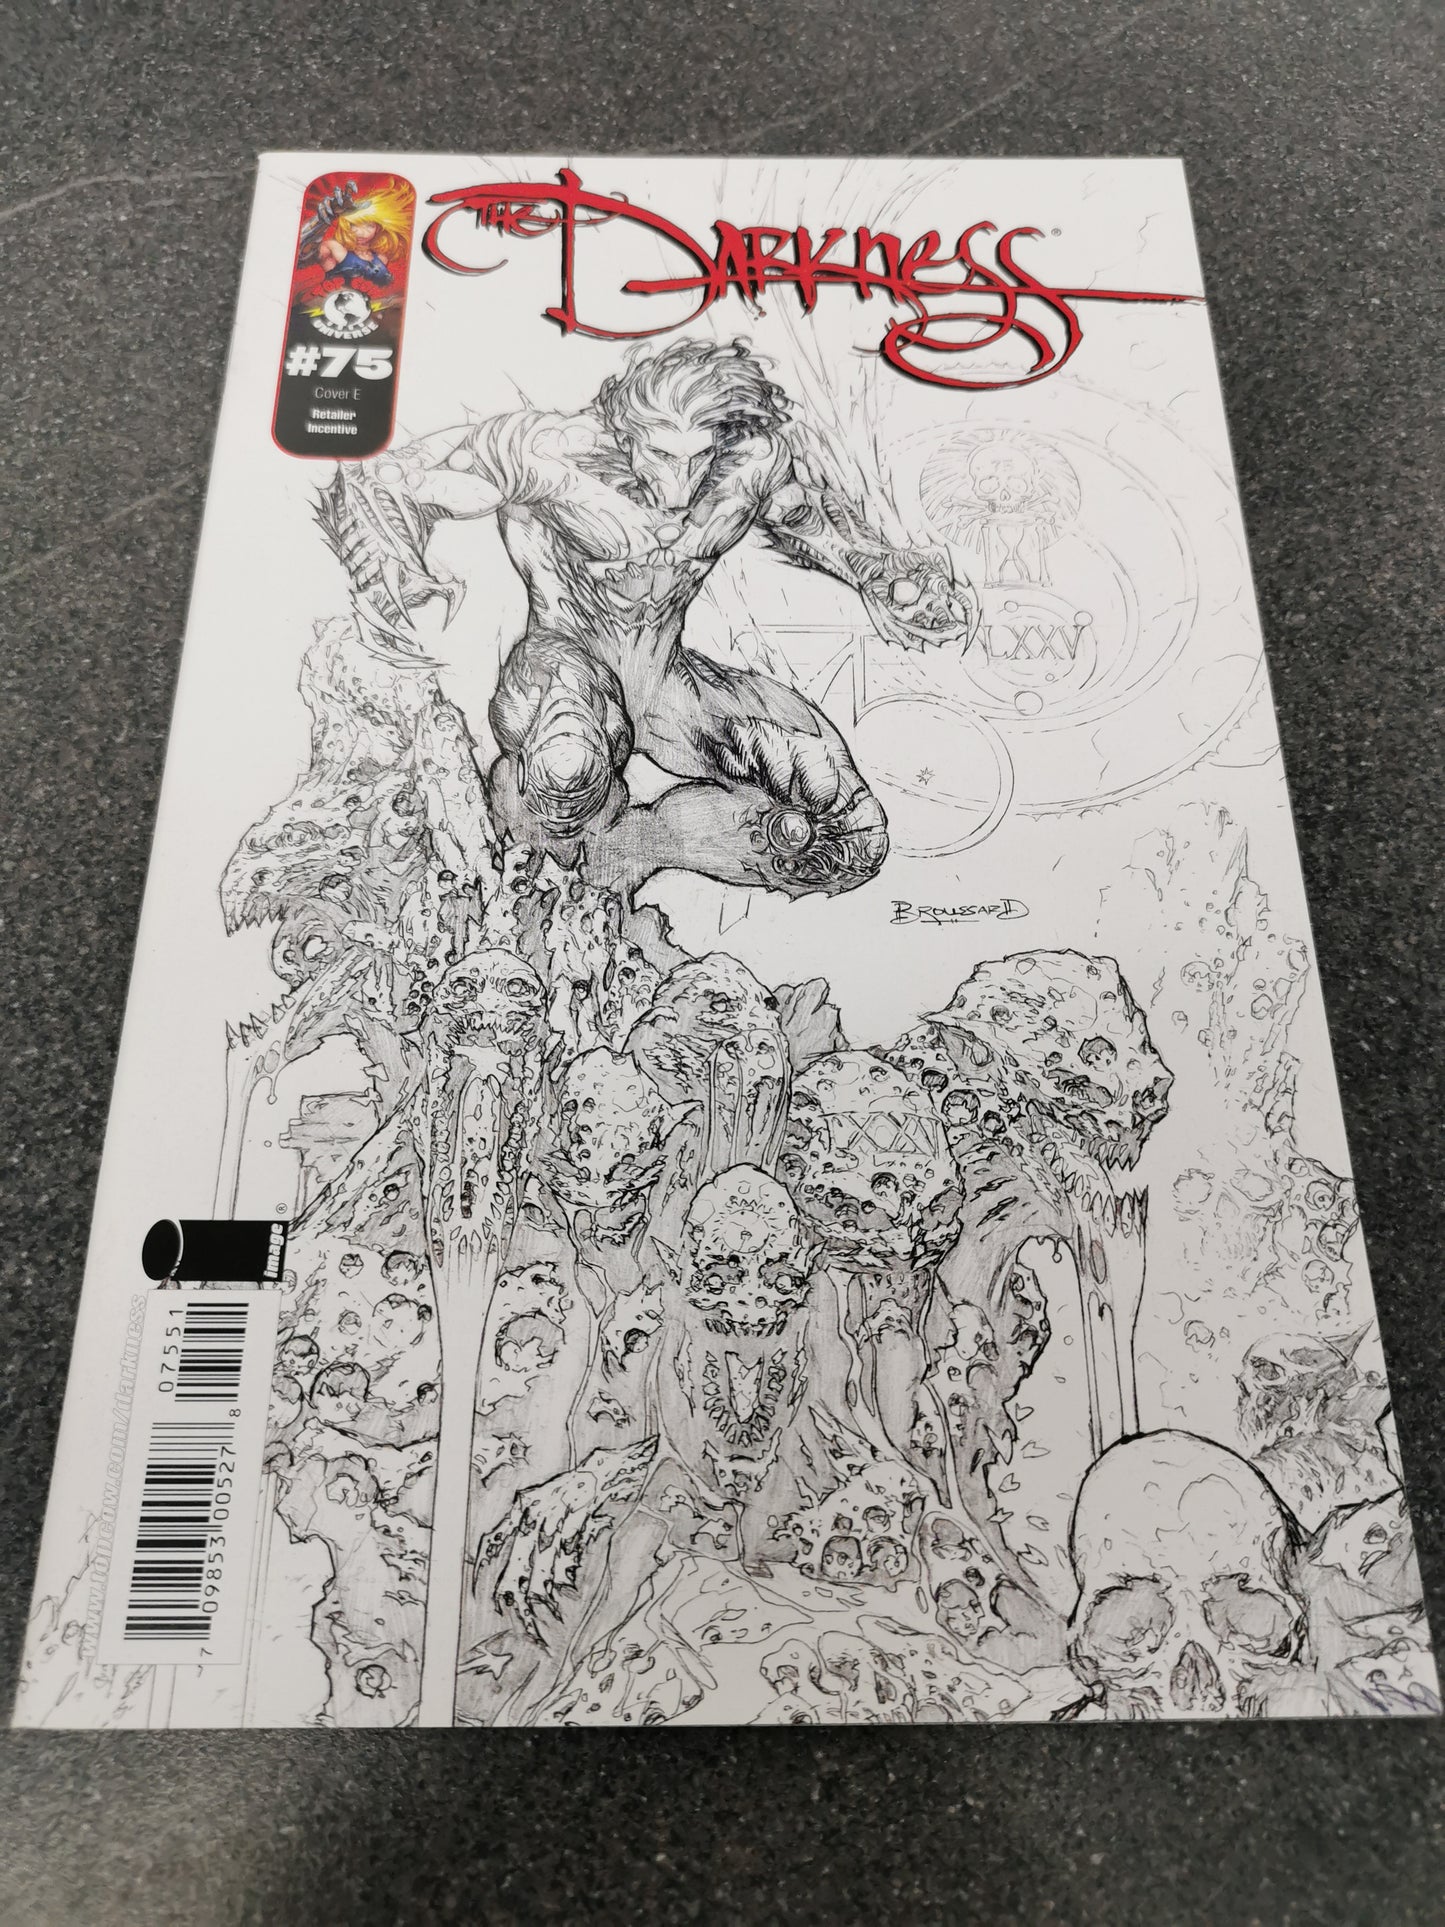 The Darkness #75 retailer variant Image comic